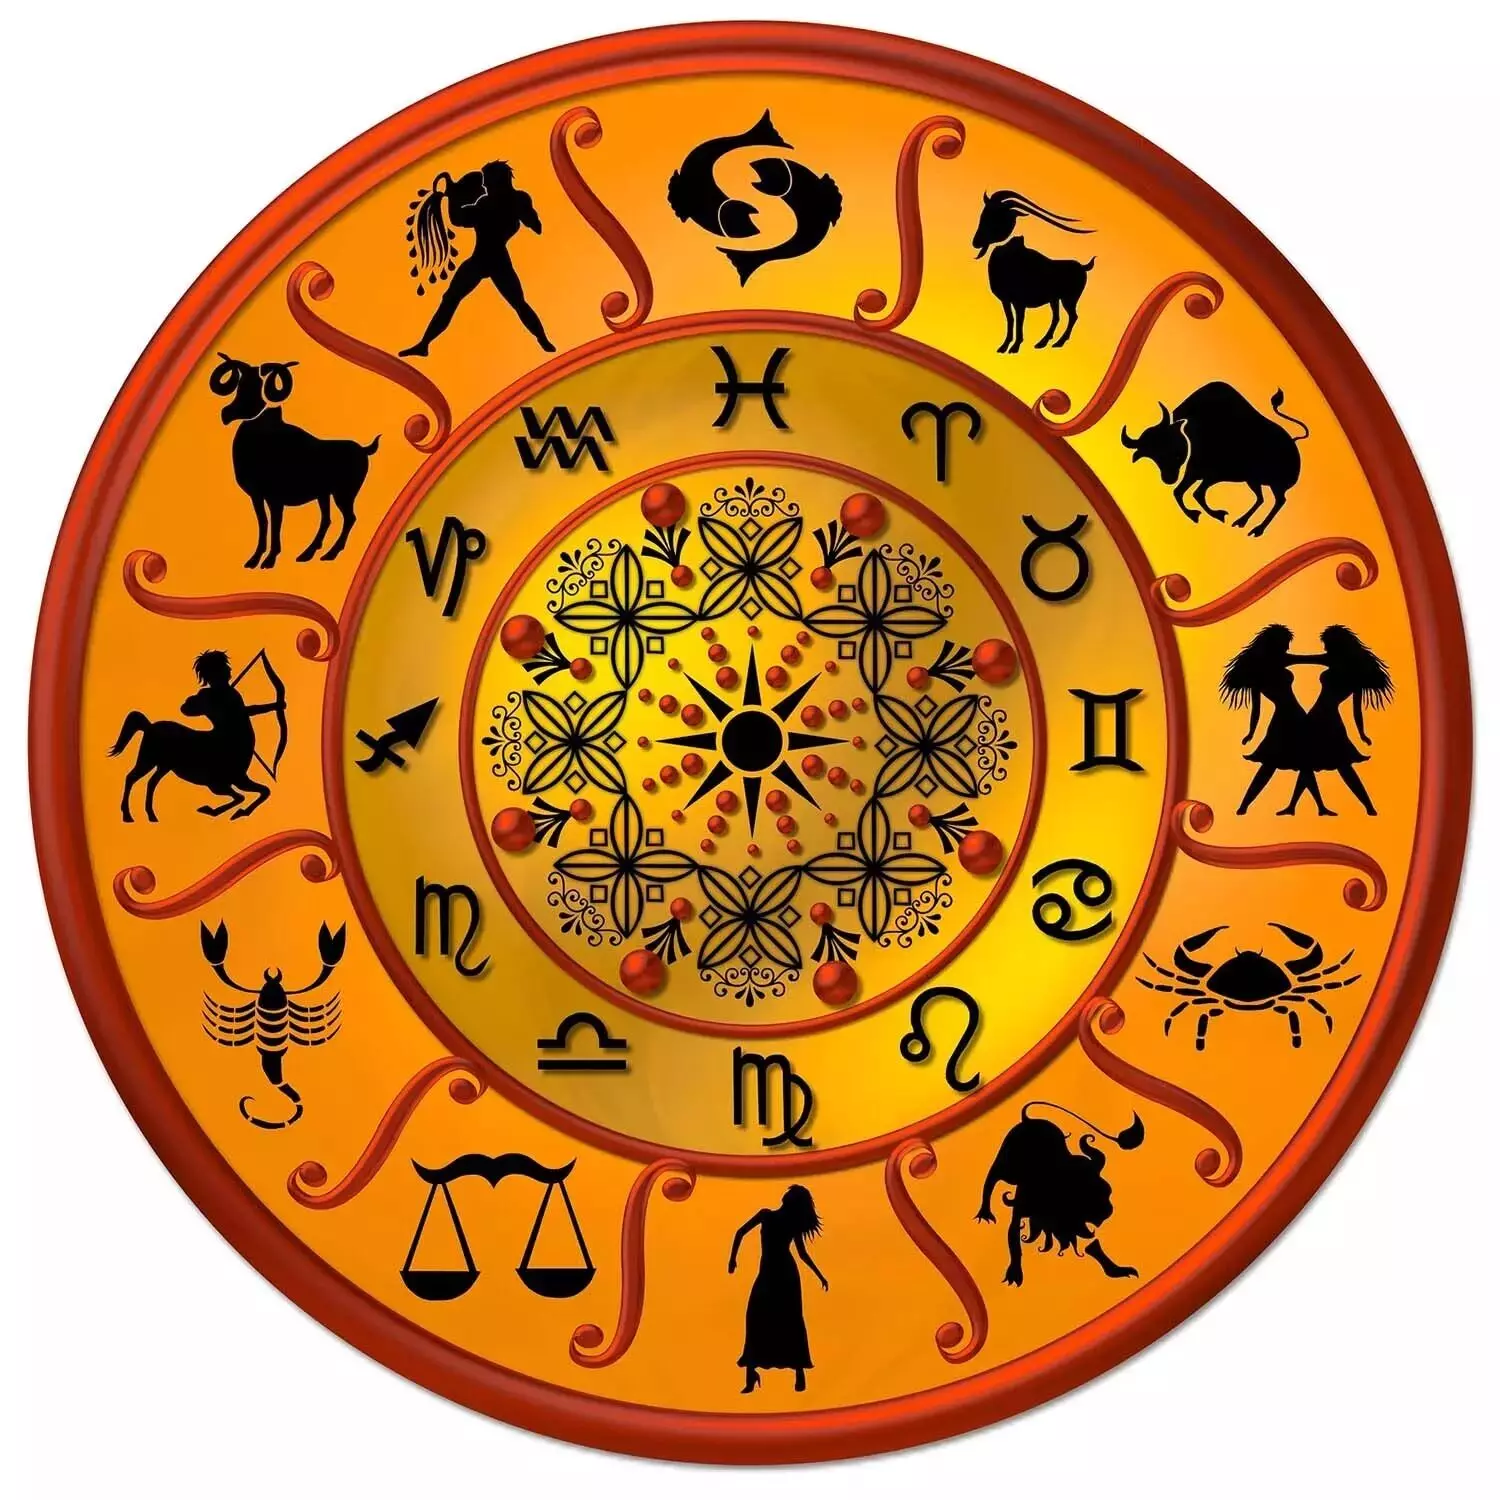 21 June  – Know your todays horoscope